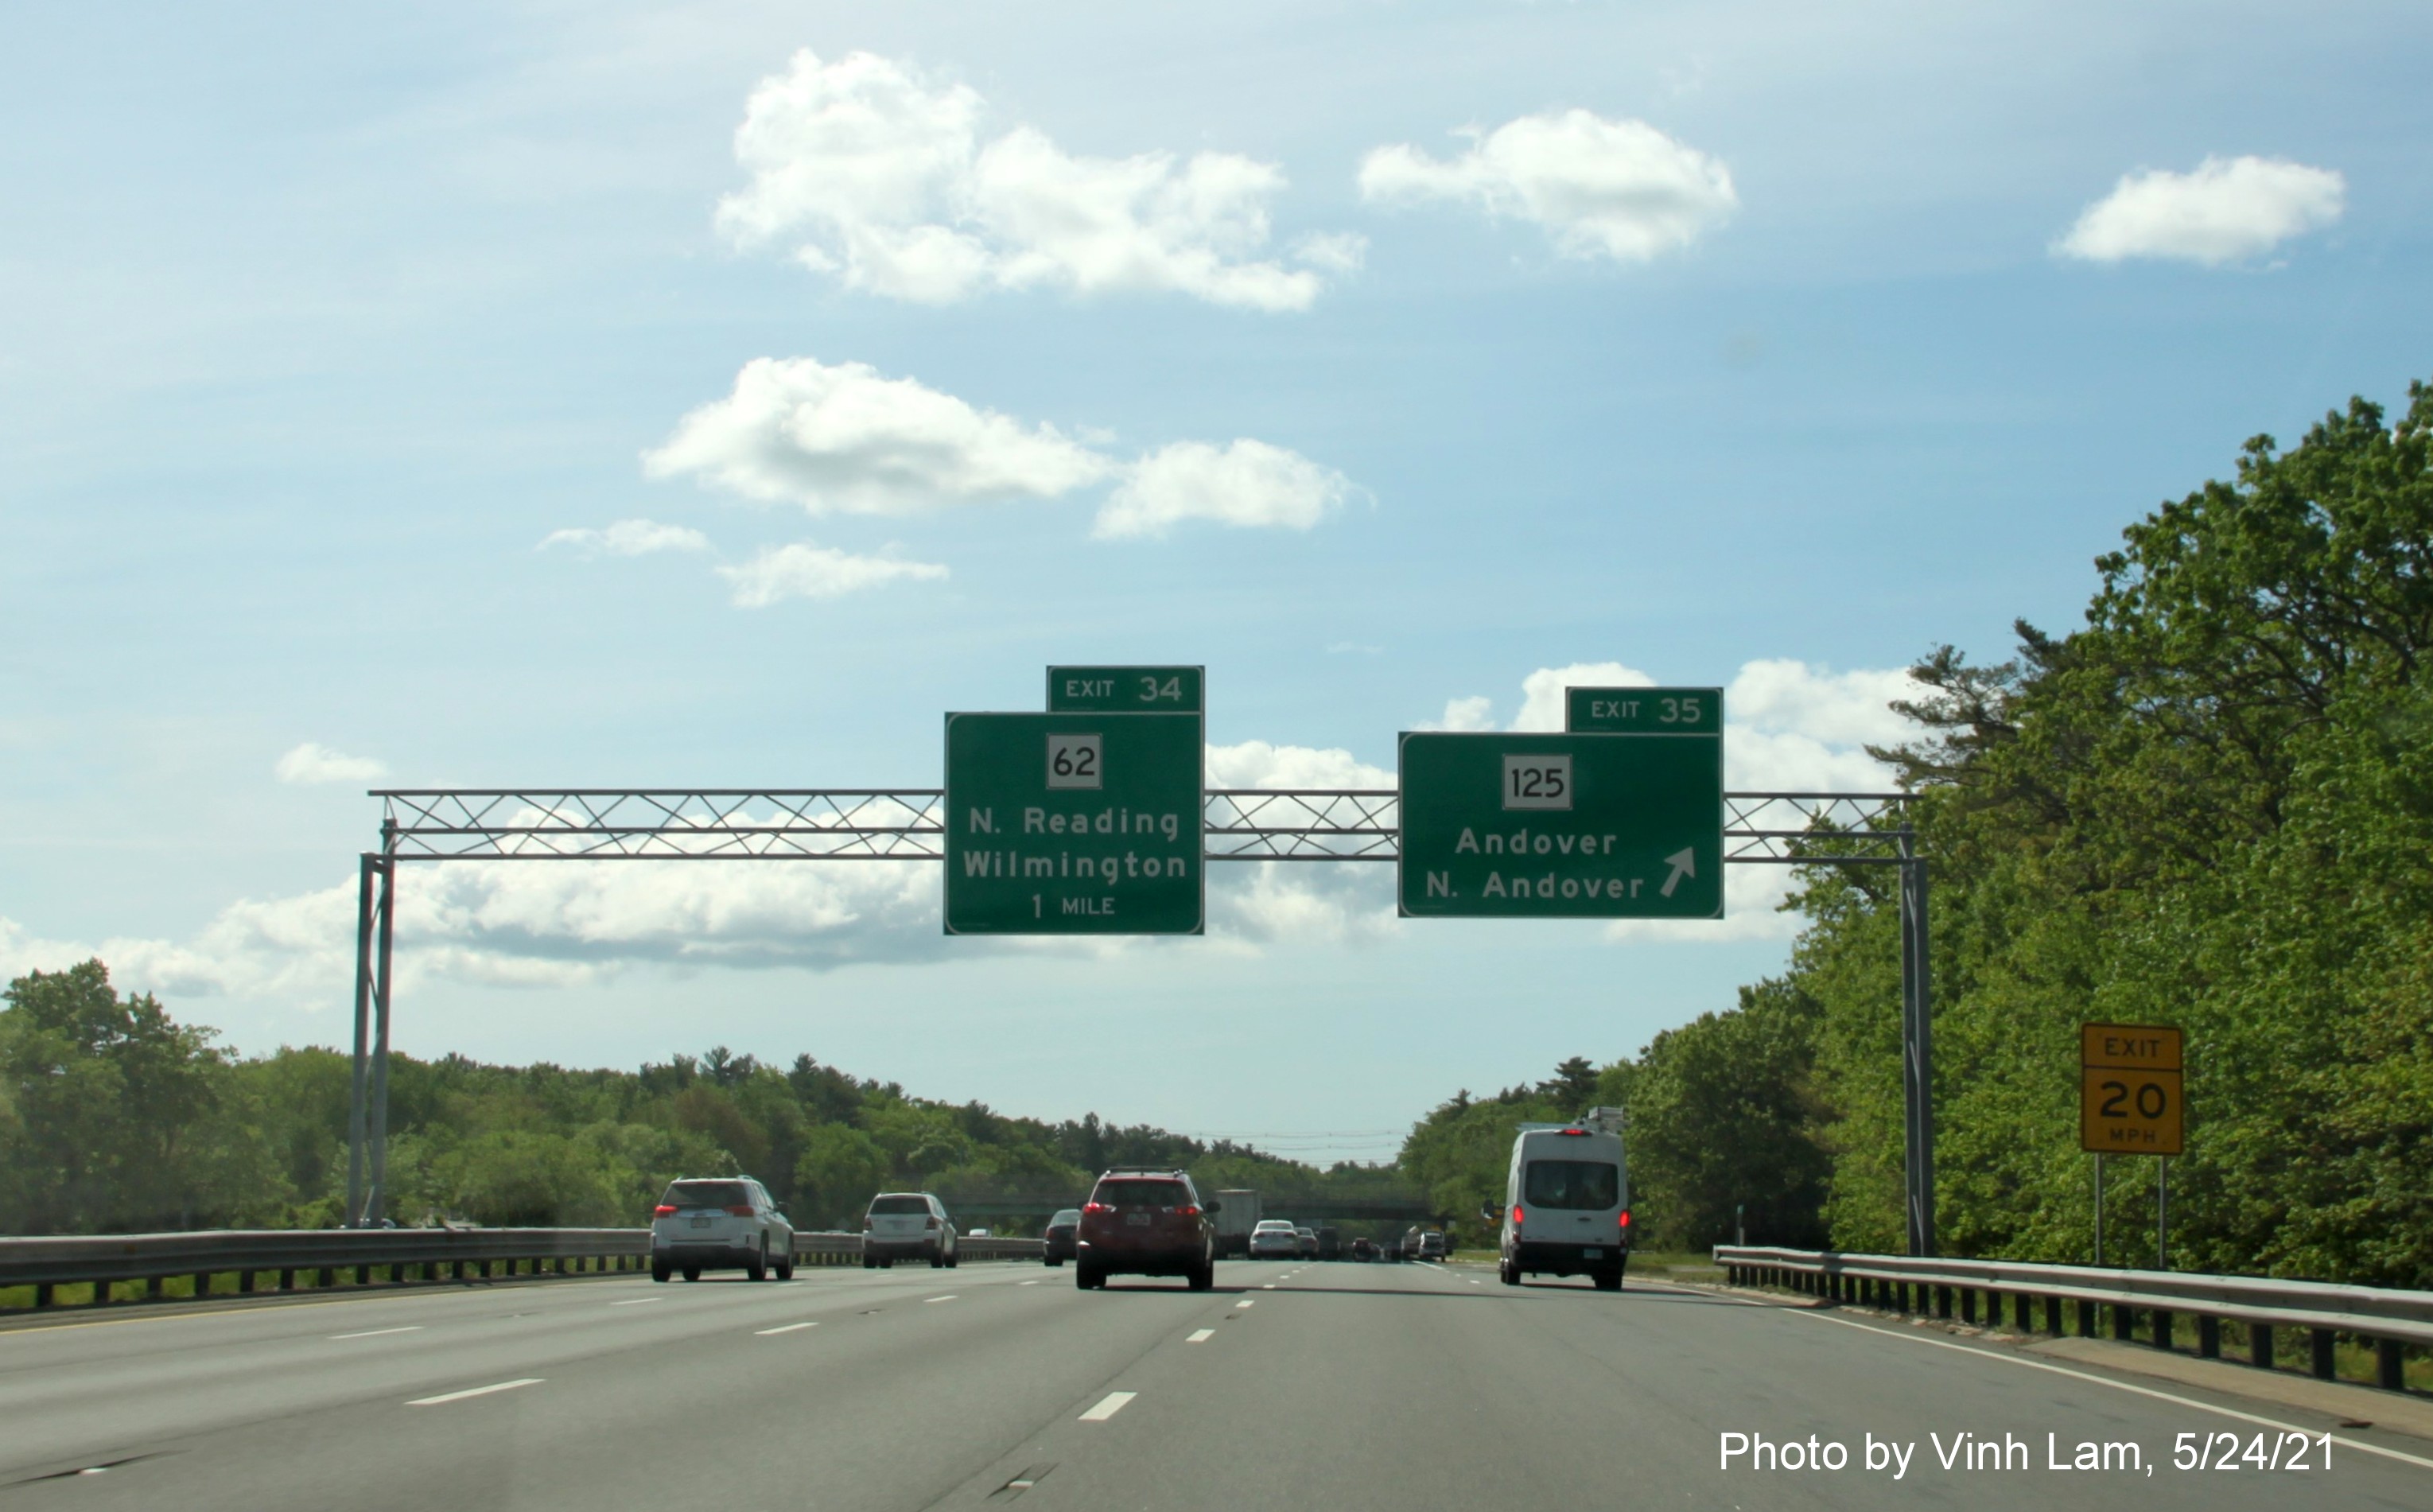 Image of overhead signage at ramp for MA 125 exit with new milepost based exit numbers for MA 125 and MA 62 exits on I-93 South in Wilmington, by Vinh Lam, May 2021